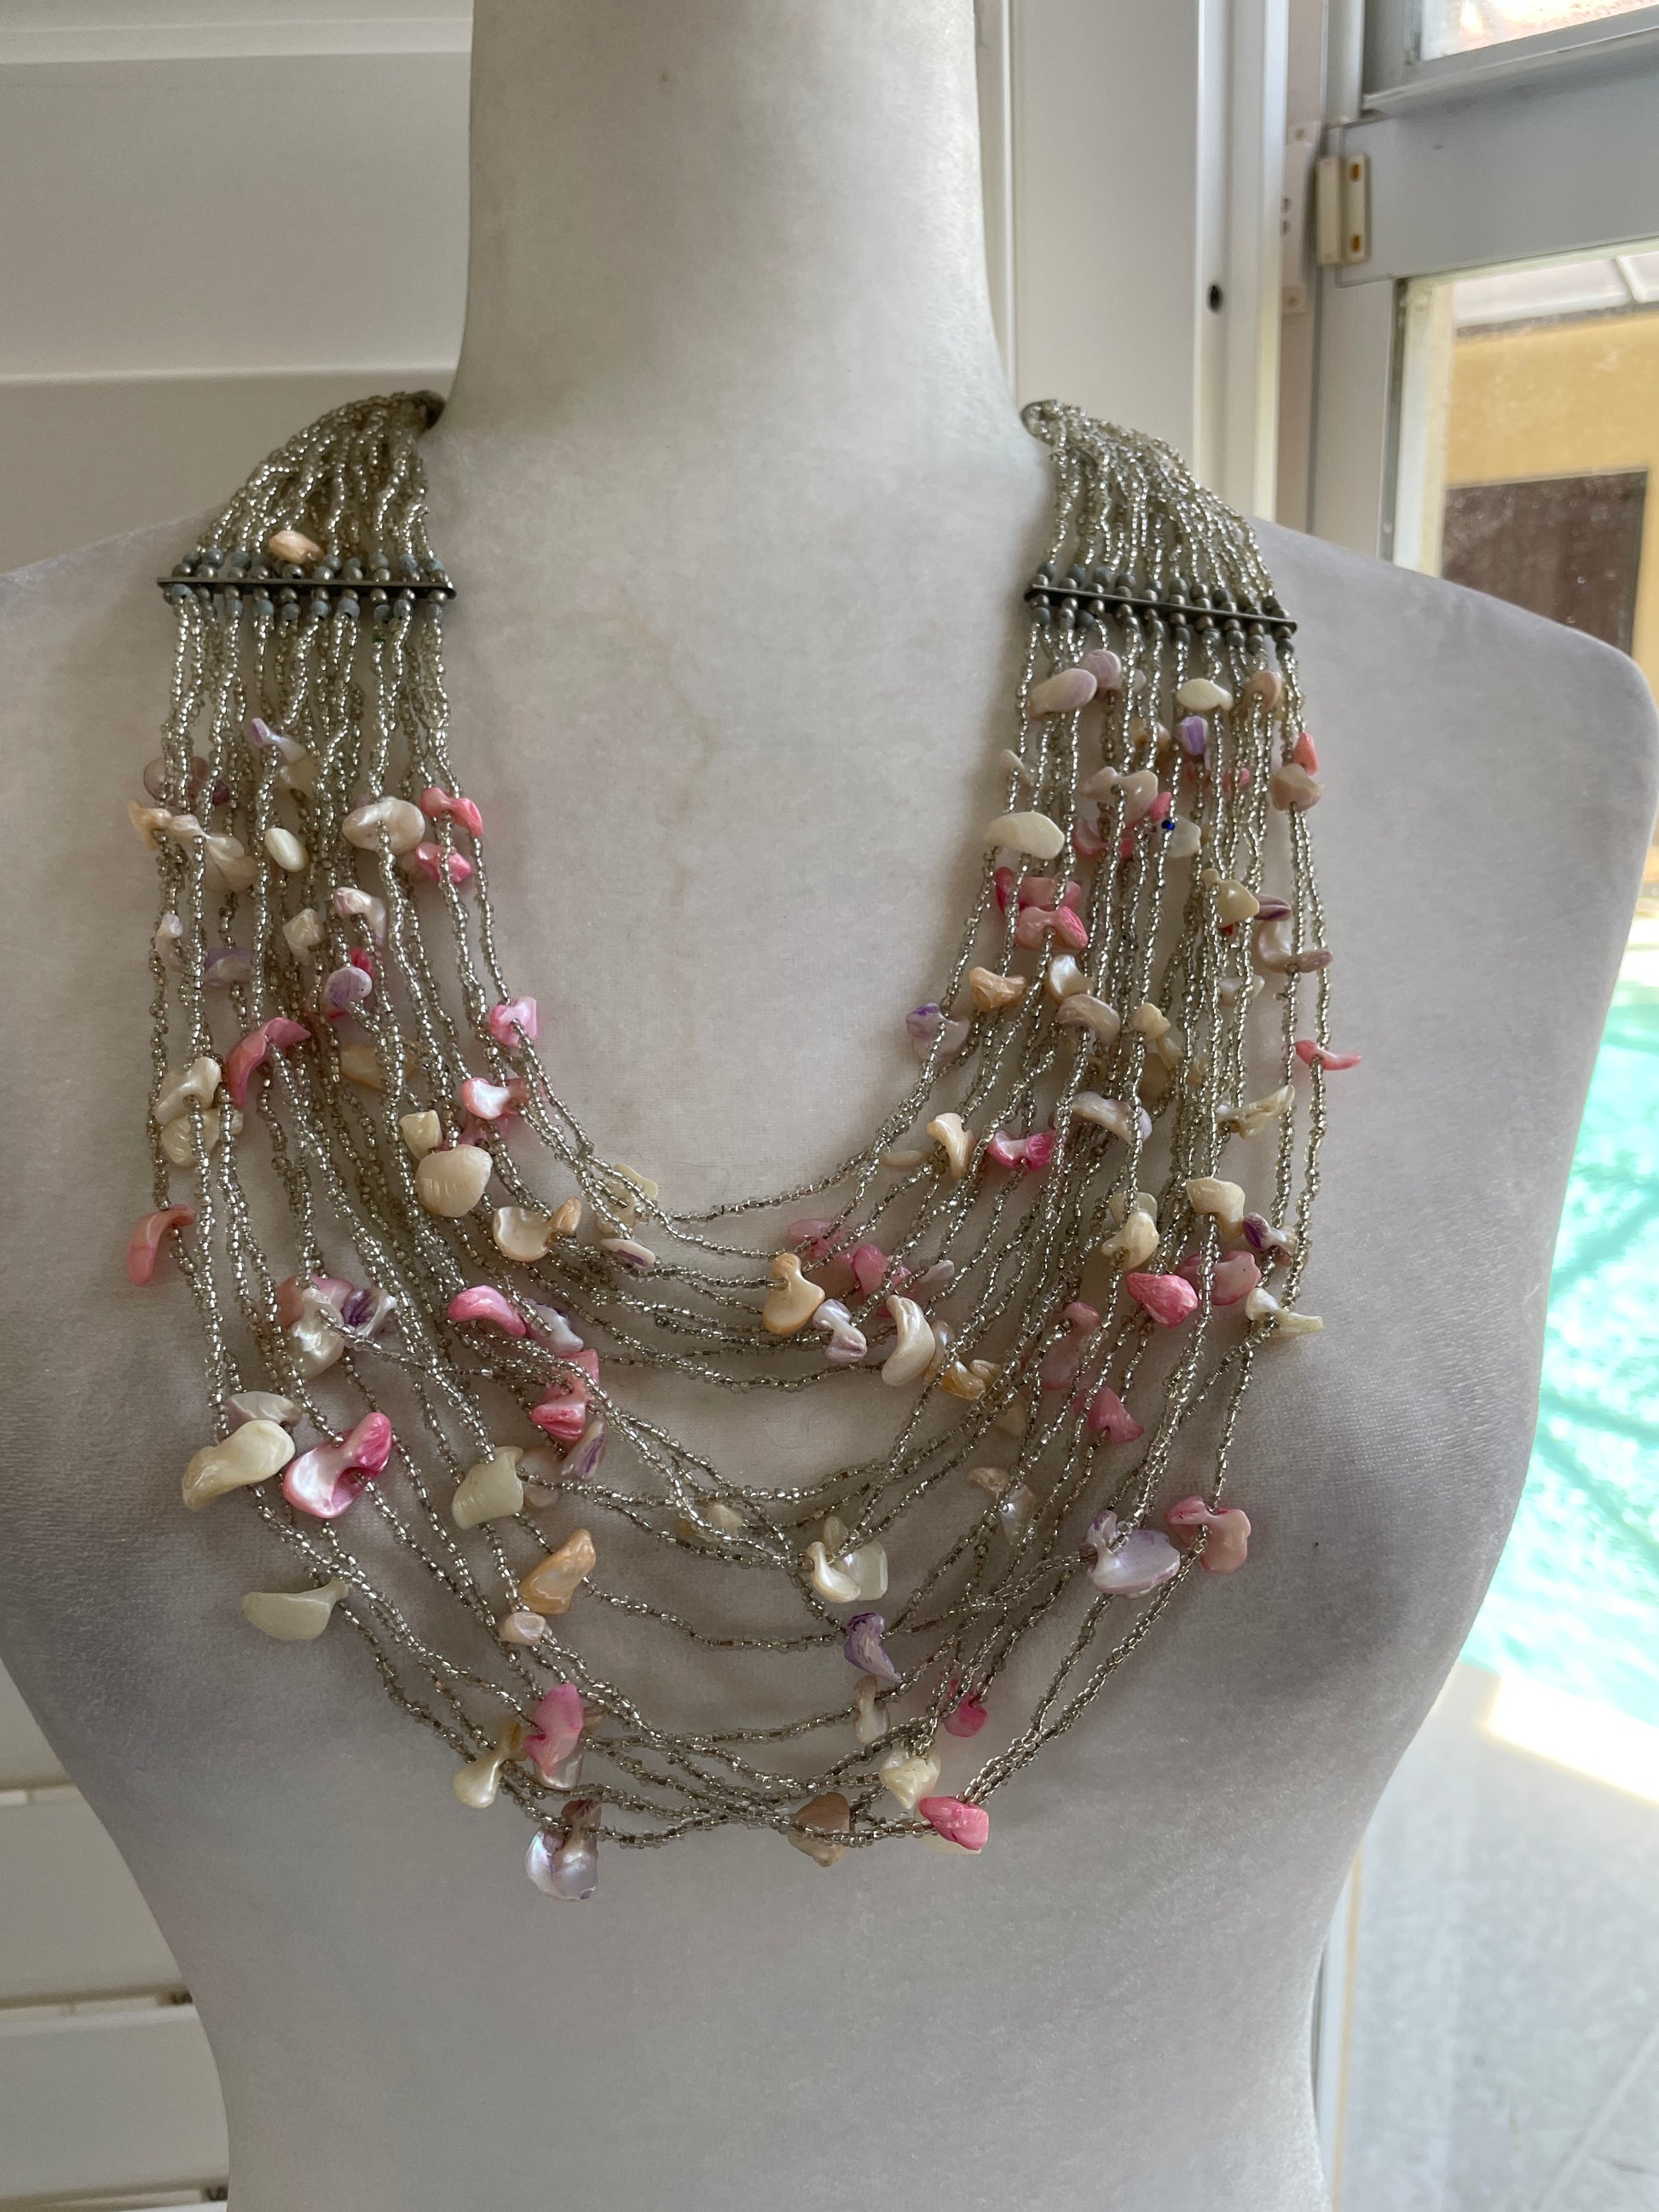 Handmade necklace  Hand Crafted 2000s Beads & Shells Draped Bib Statement Necklace